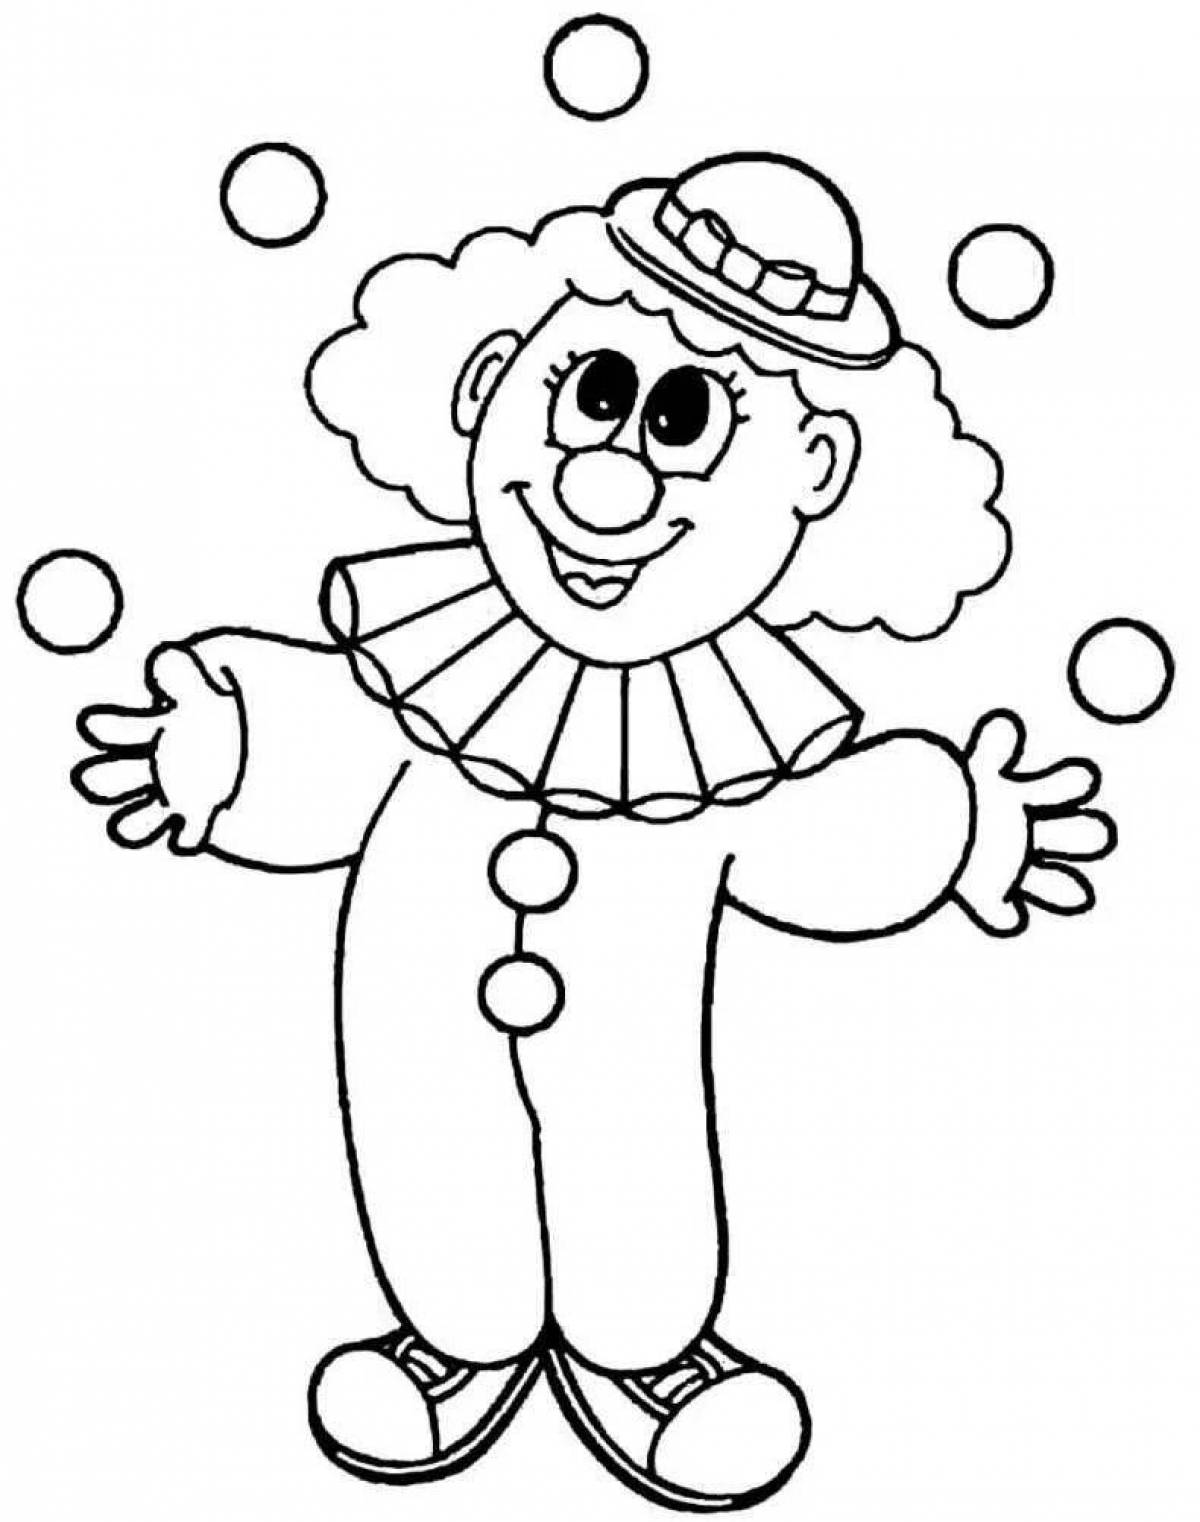 Colorful funny clown coloring book for kids